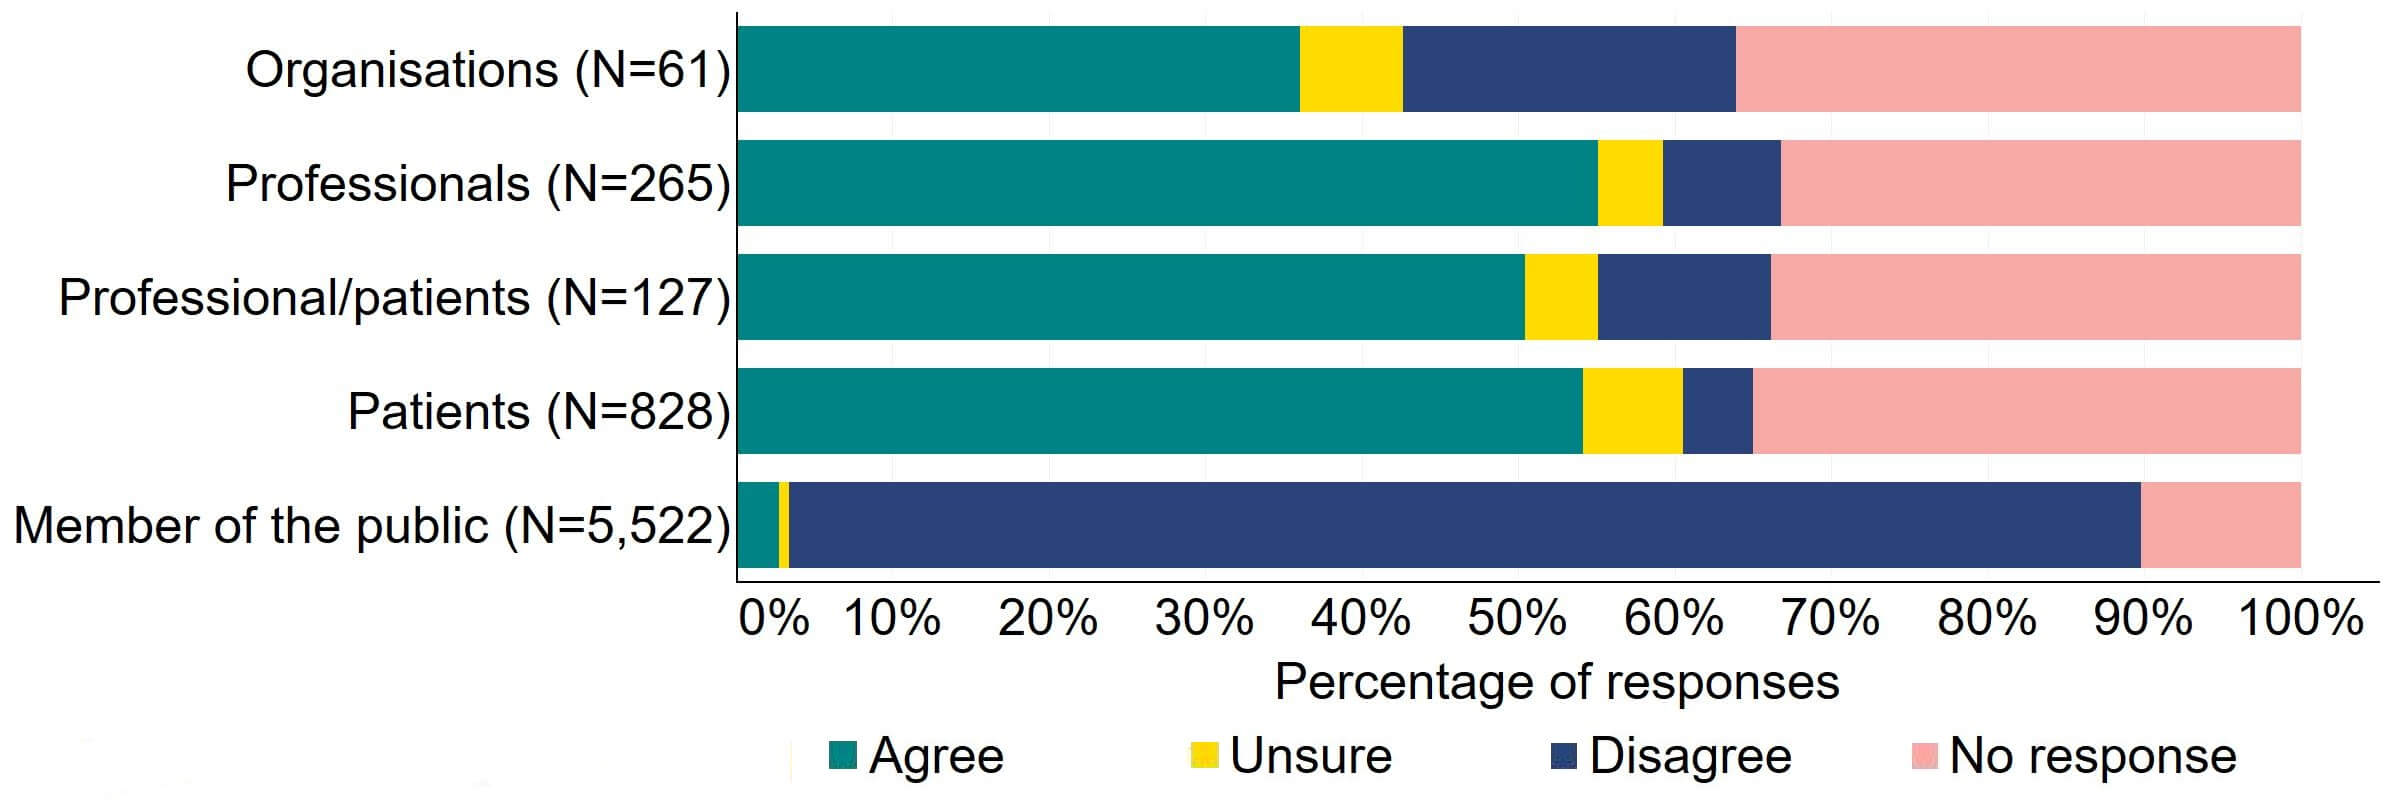 Figure 17 is a stacked bar chart showing the proportion of respondents in each response group who agreed, disagreed, were unsure, or who did not provide a response to the proposal. The underlying data can be downloaded as an Excel worksheet at the top of the page.